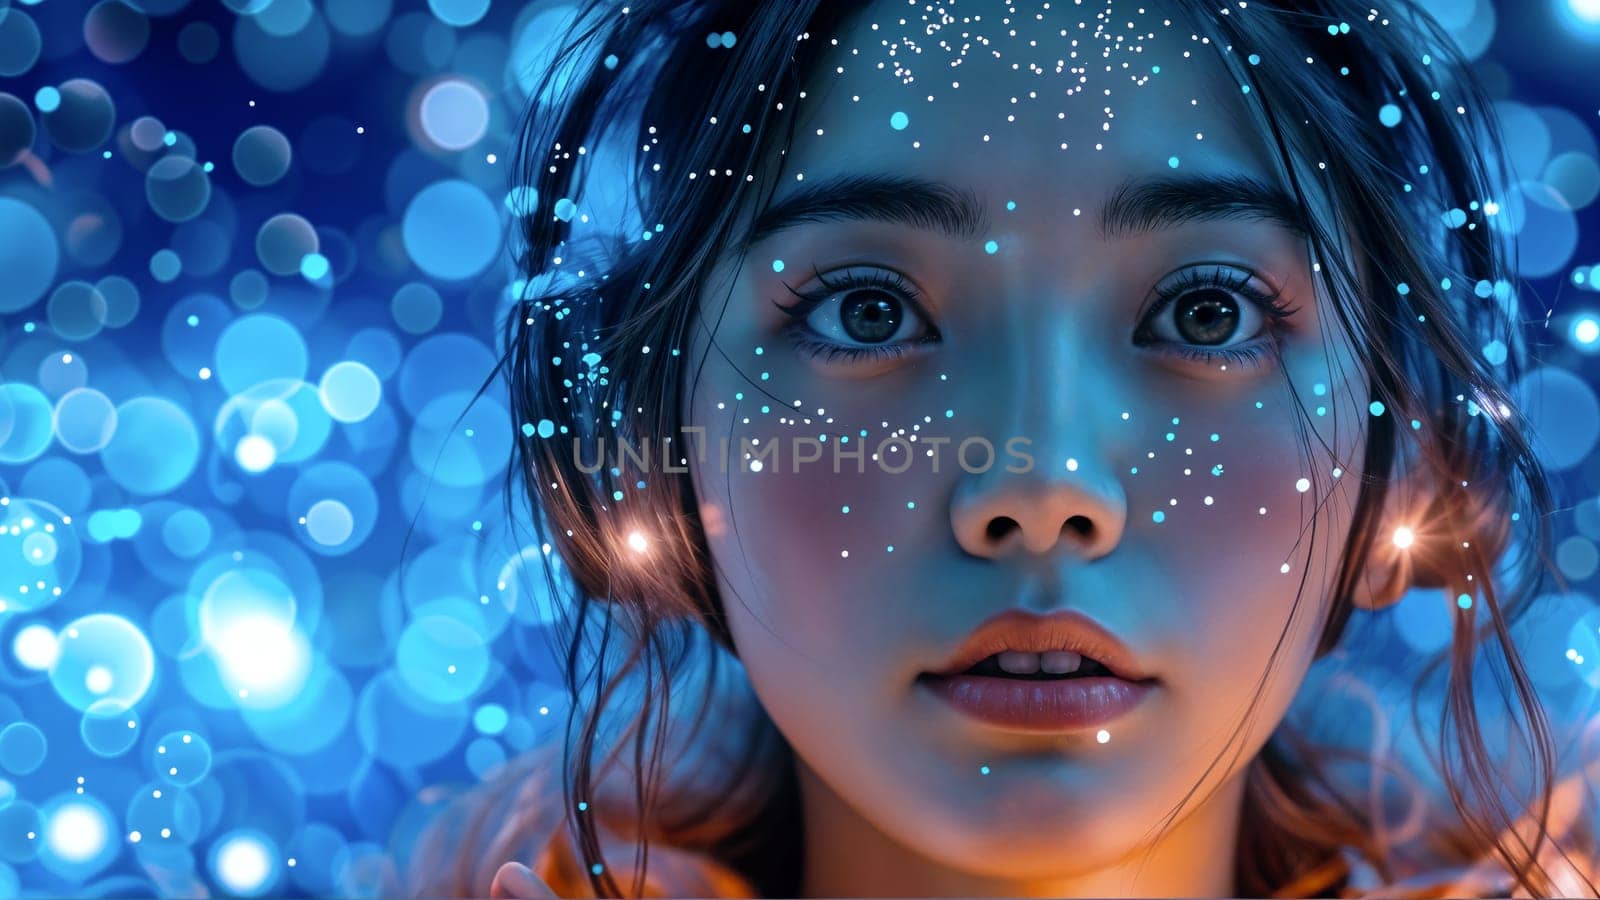 Young Woman With Headphones Engaging in Music Amidst Blue Lights by chrisroll